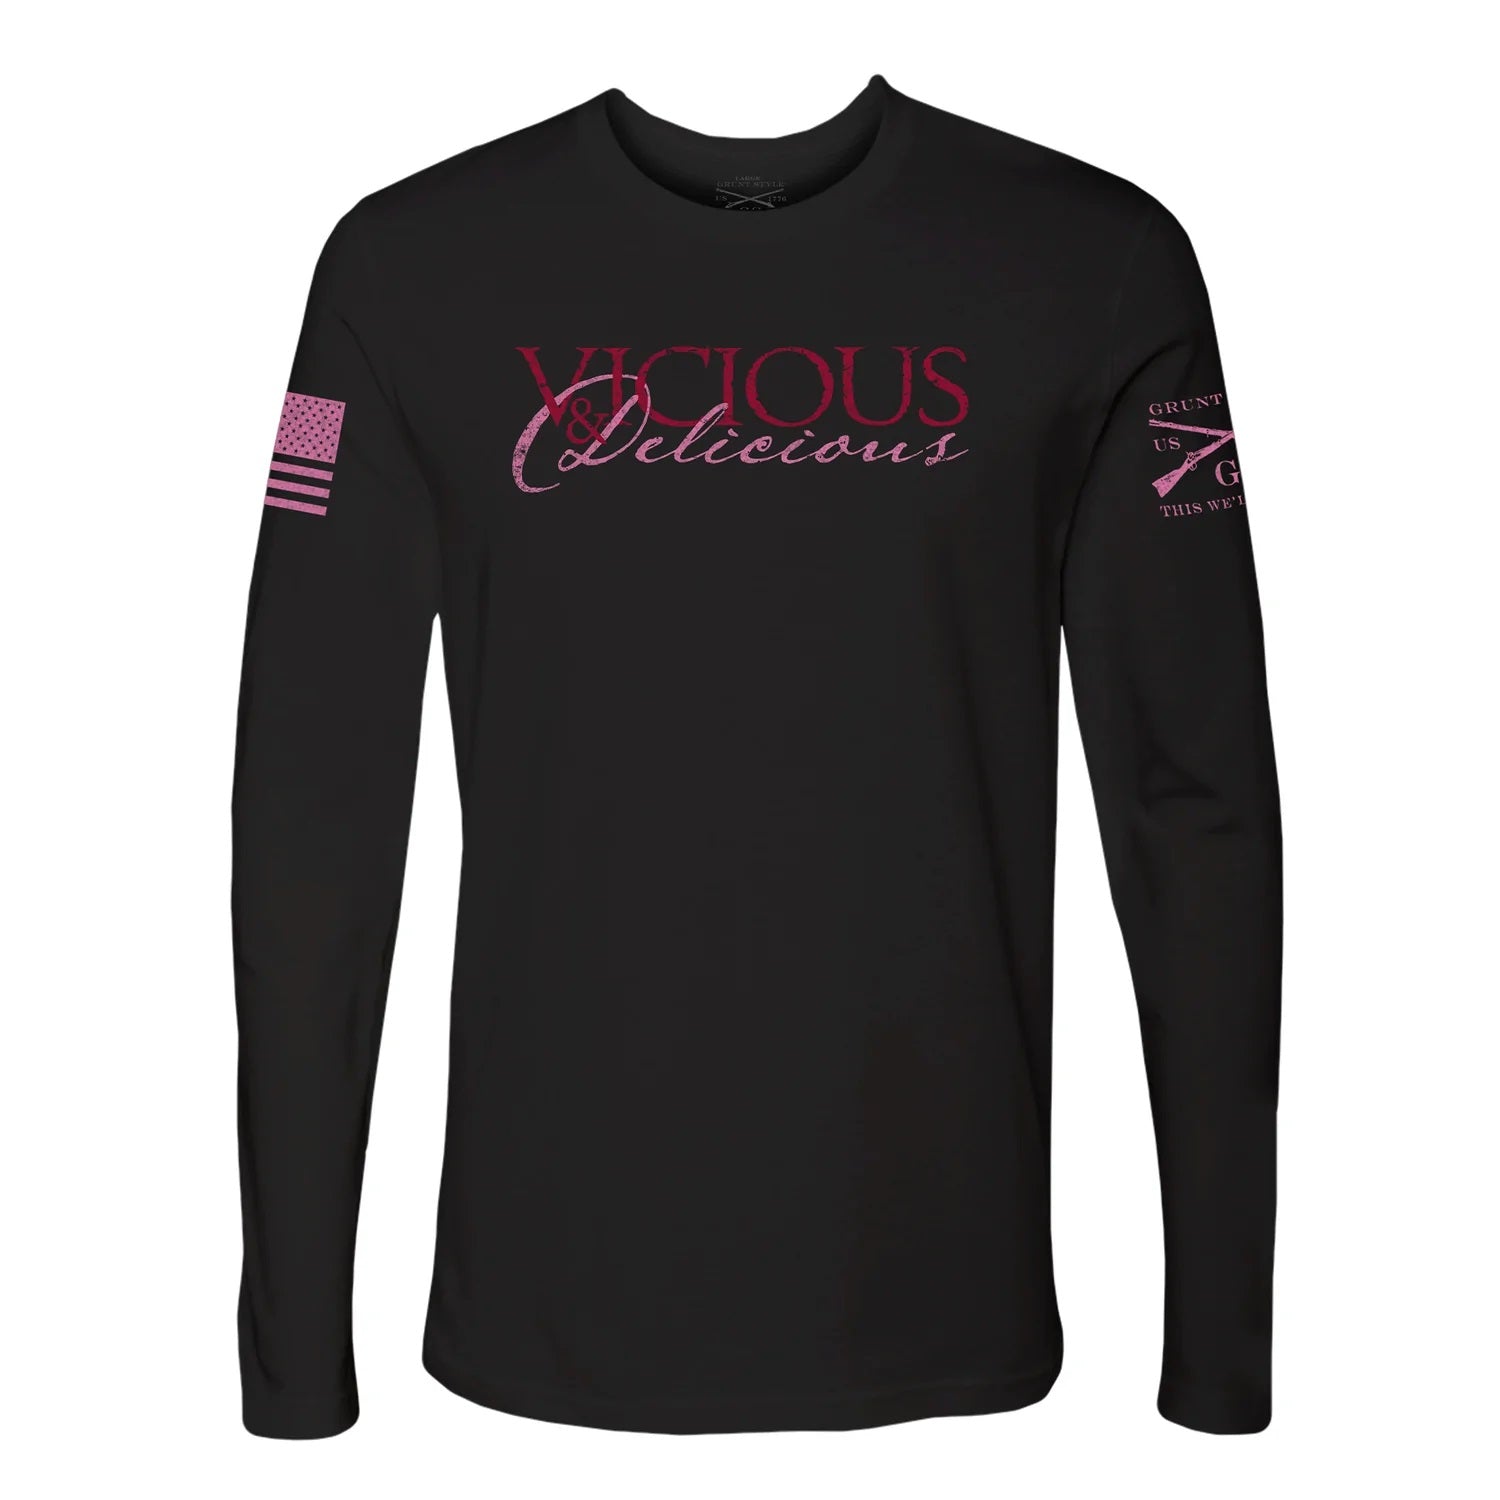 'Grunt Style' Women's Vicious & Delicious Long Sleeve Tee - Black